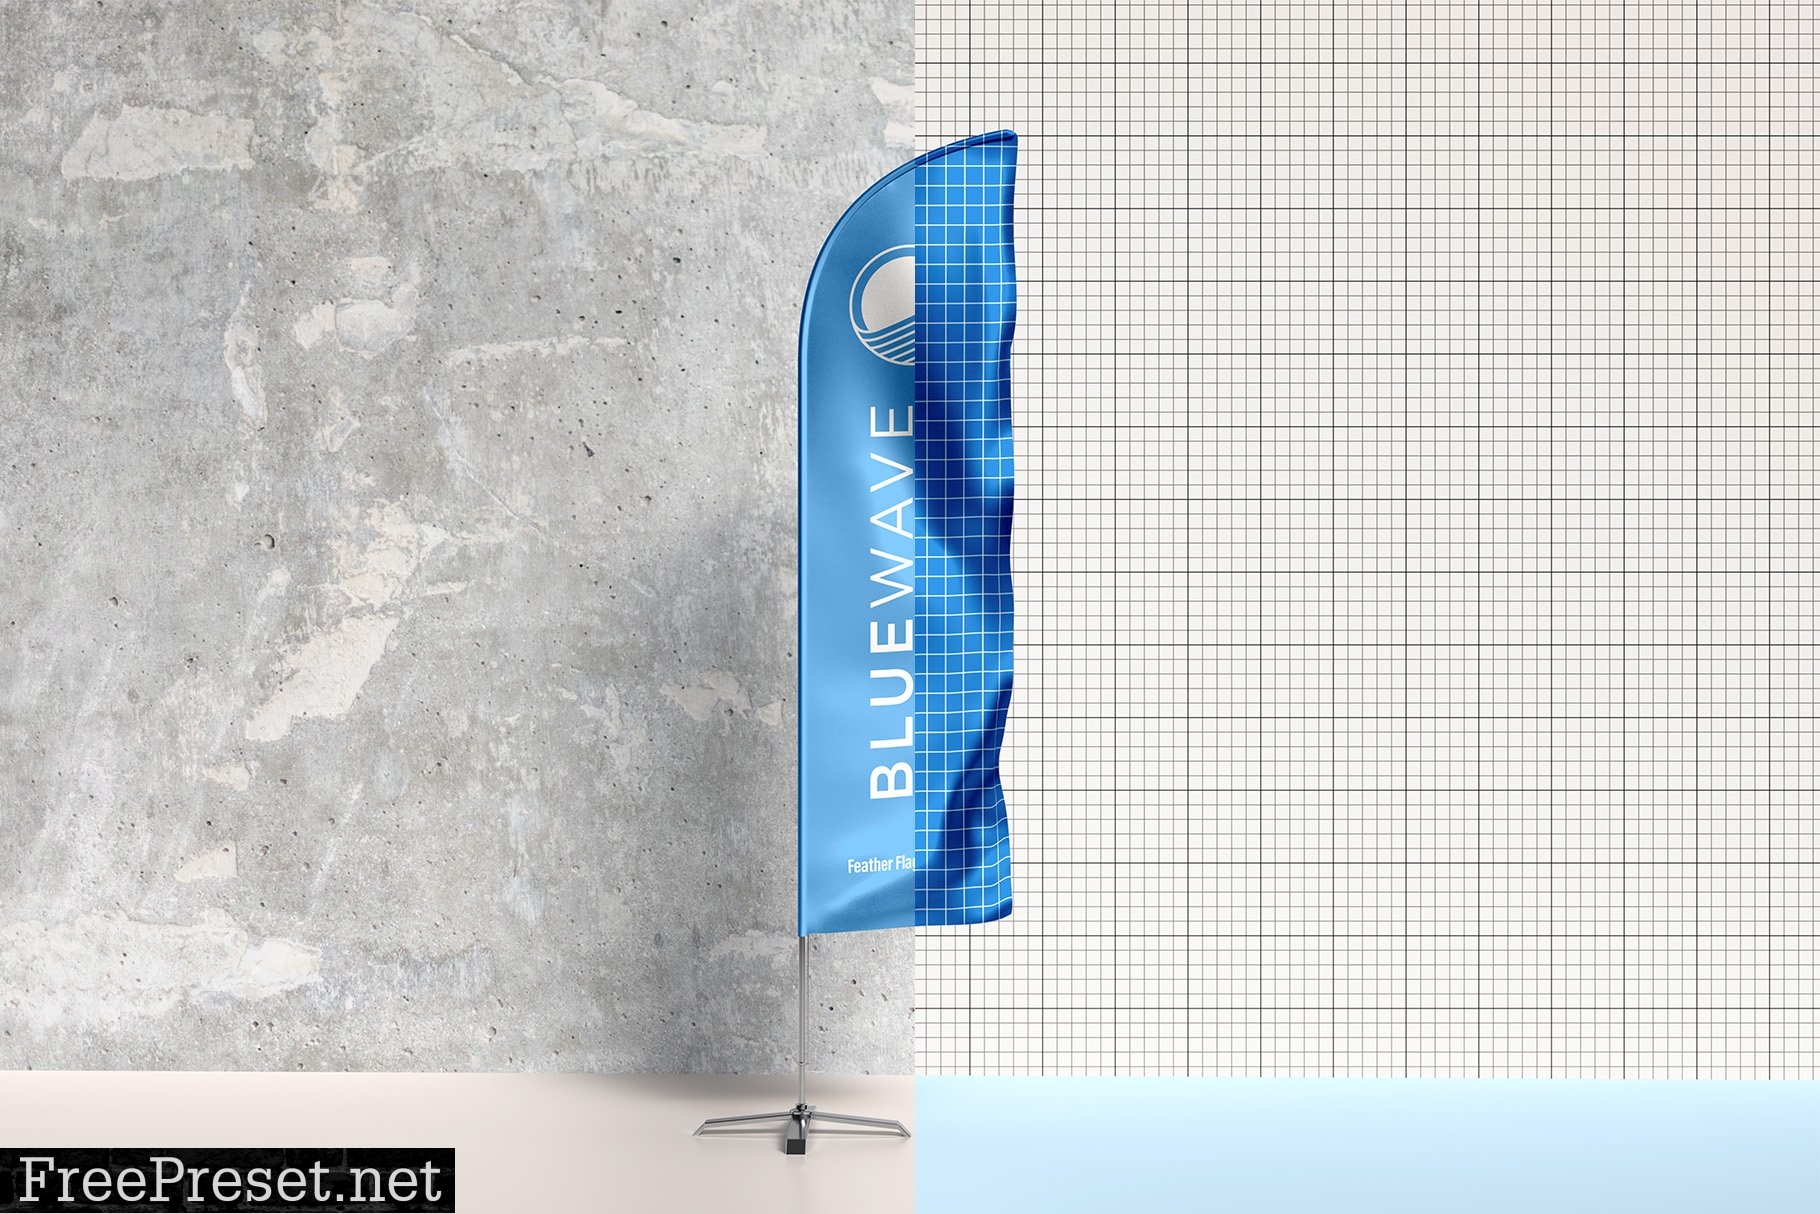 Feather Flag Mockup - 6 Views 7367179